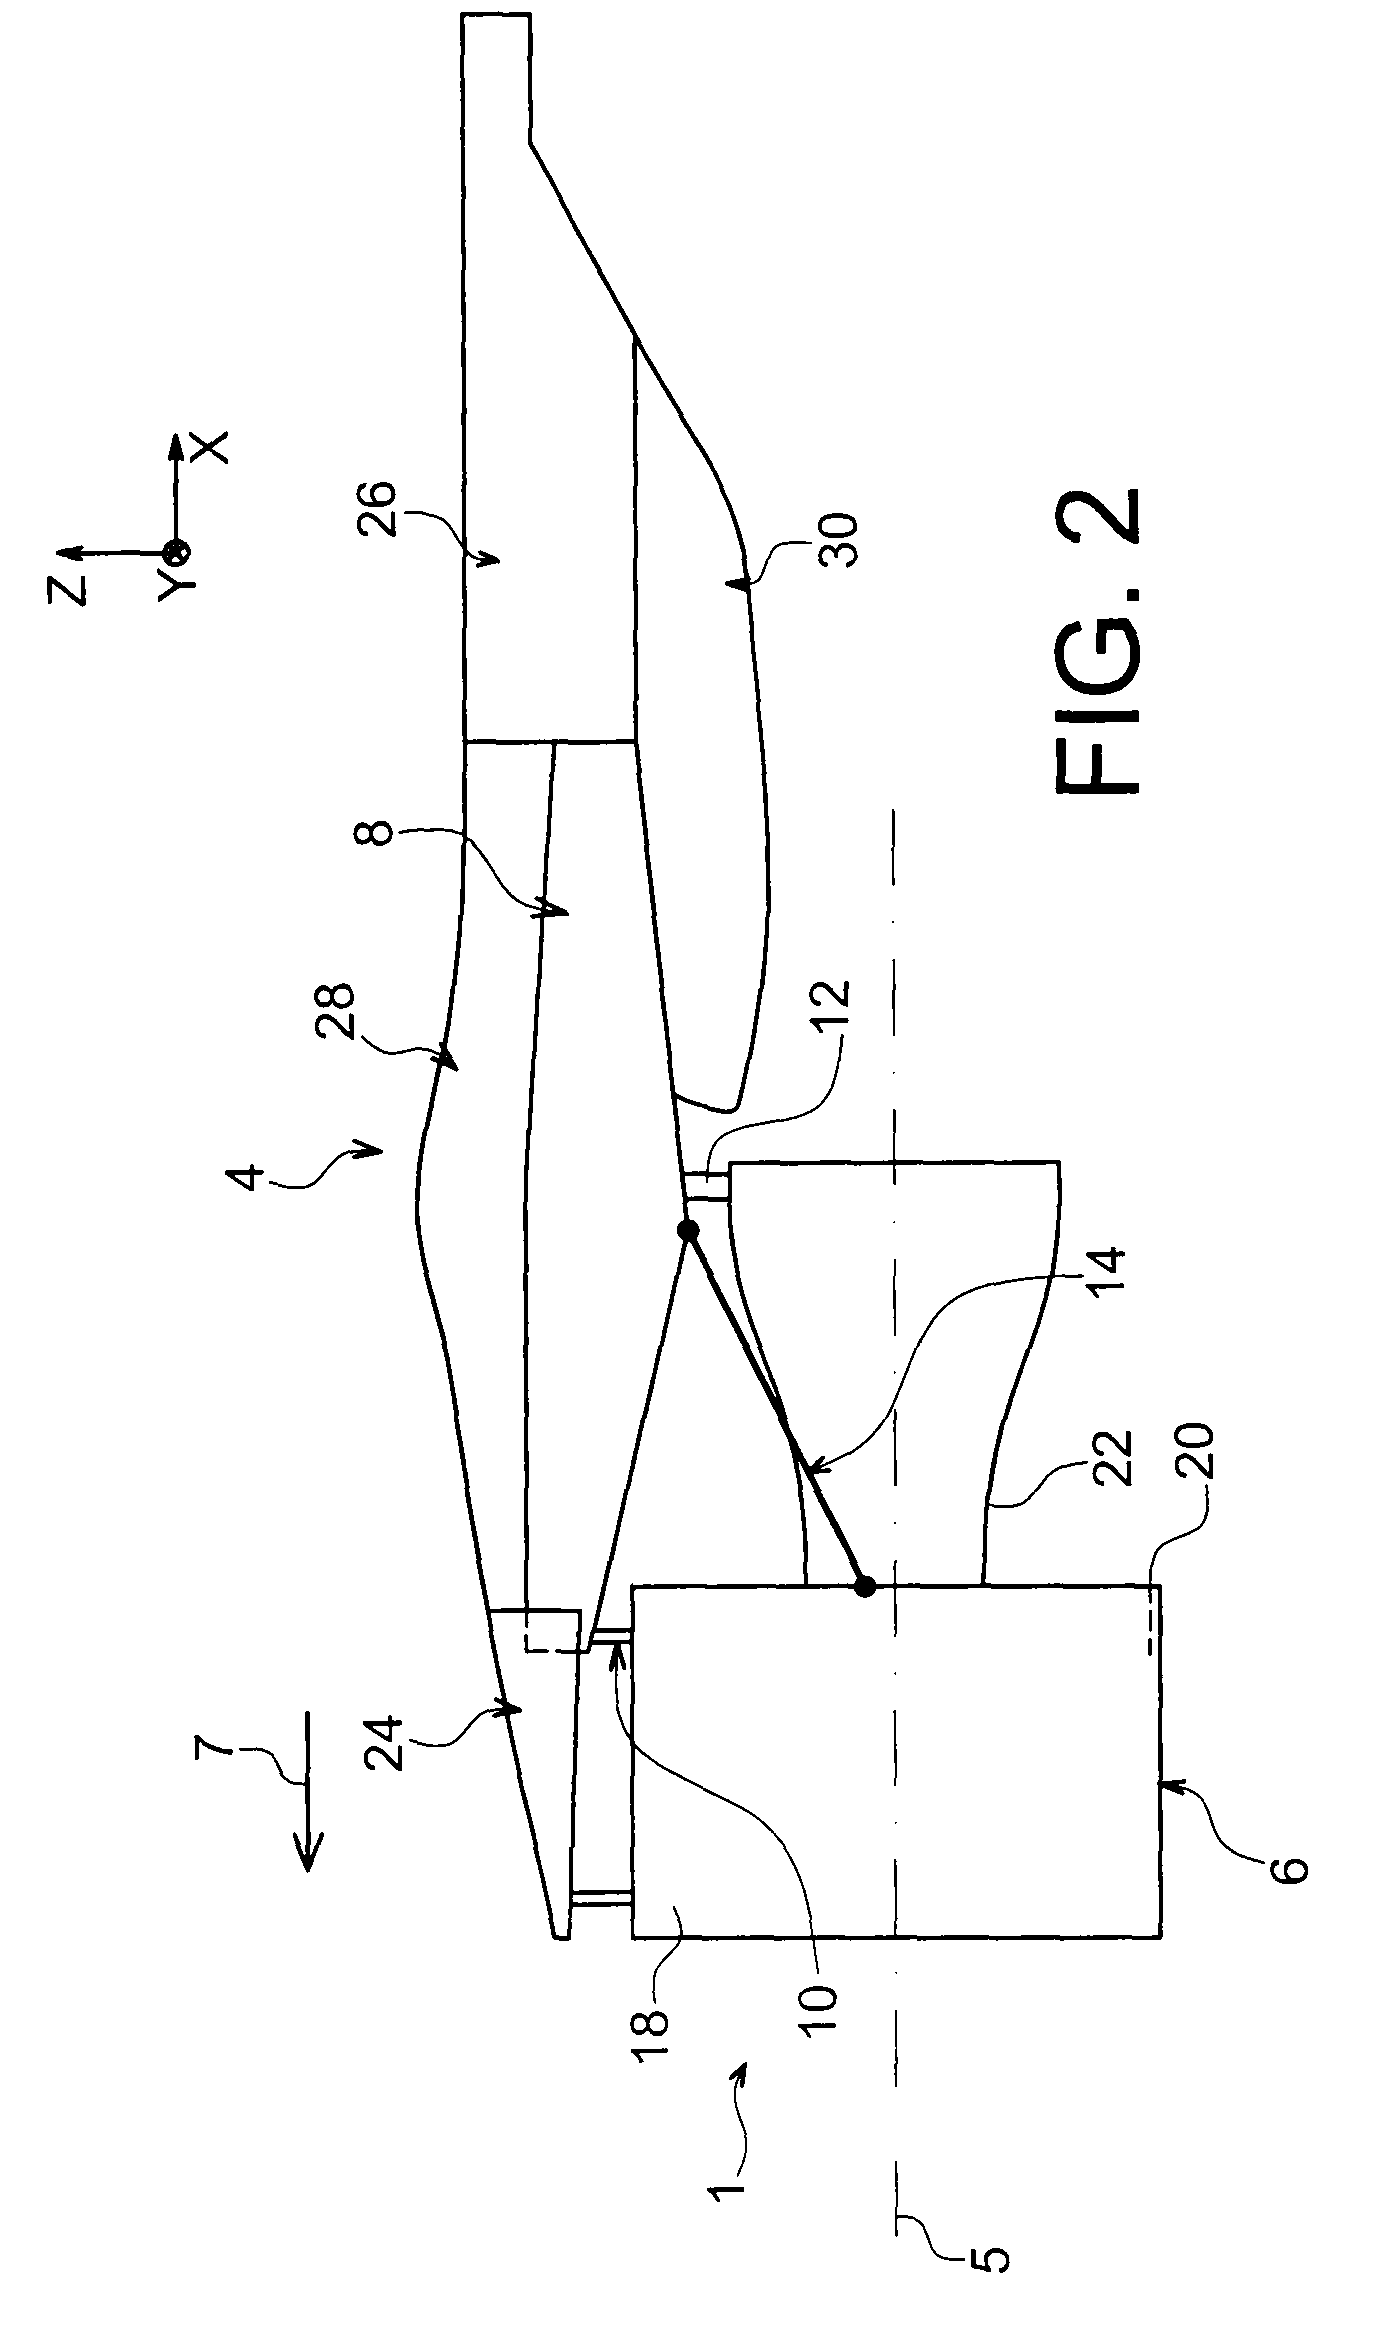 Aircraft engine assembly comprising a fan cowl-supporting cradle mounted on two separate elements